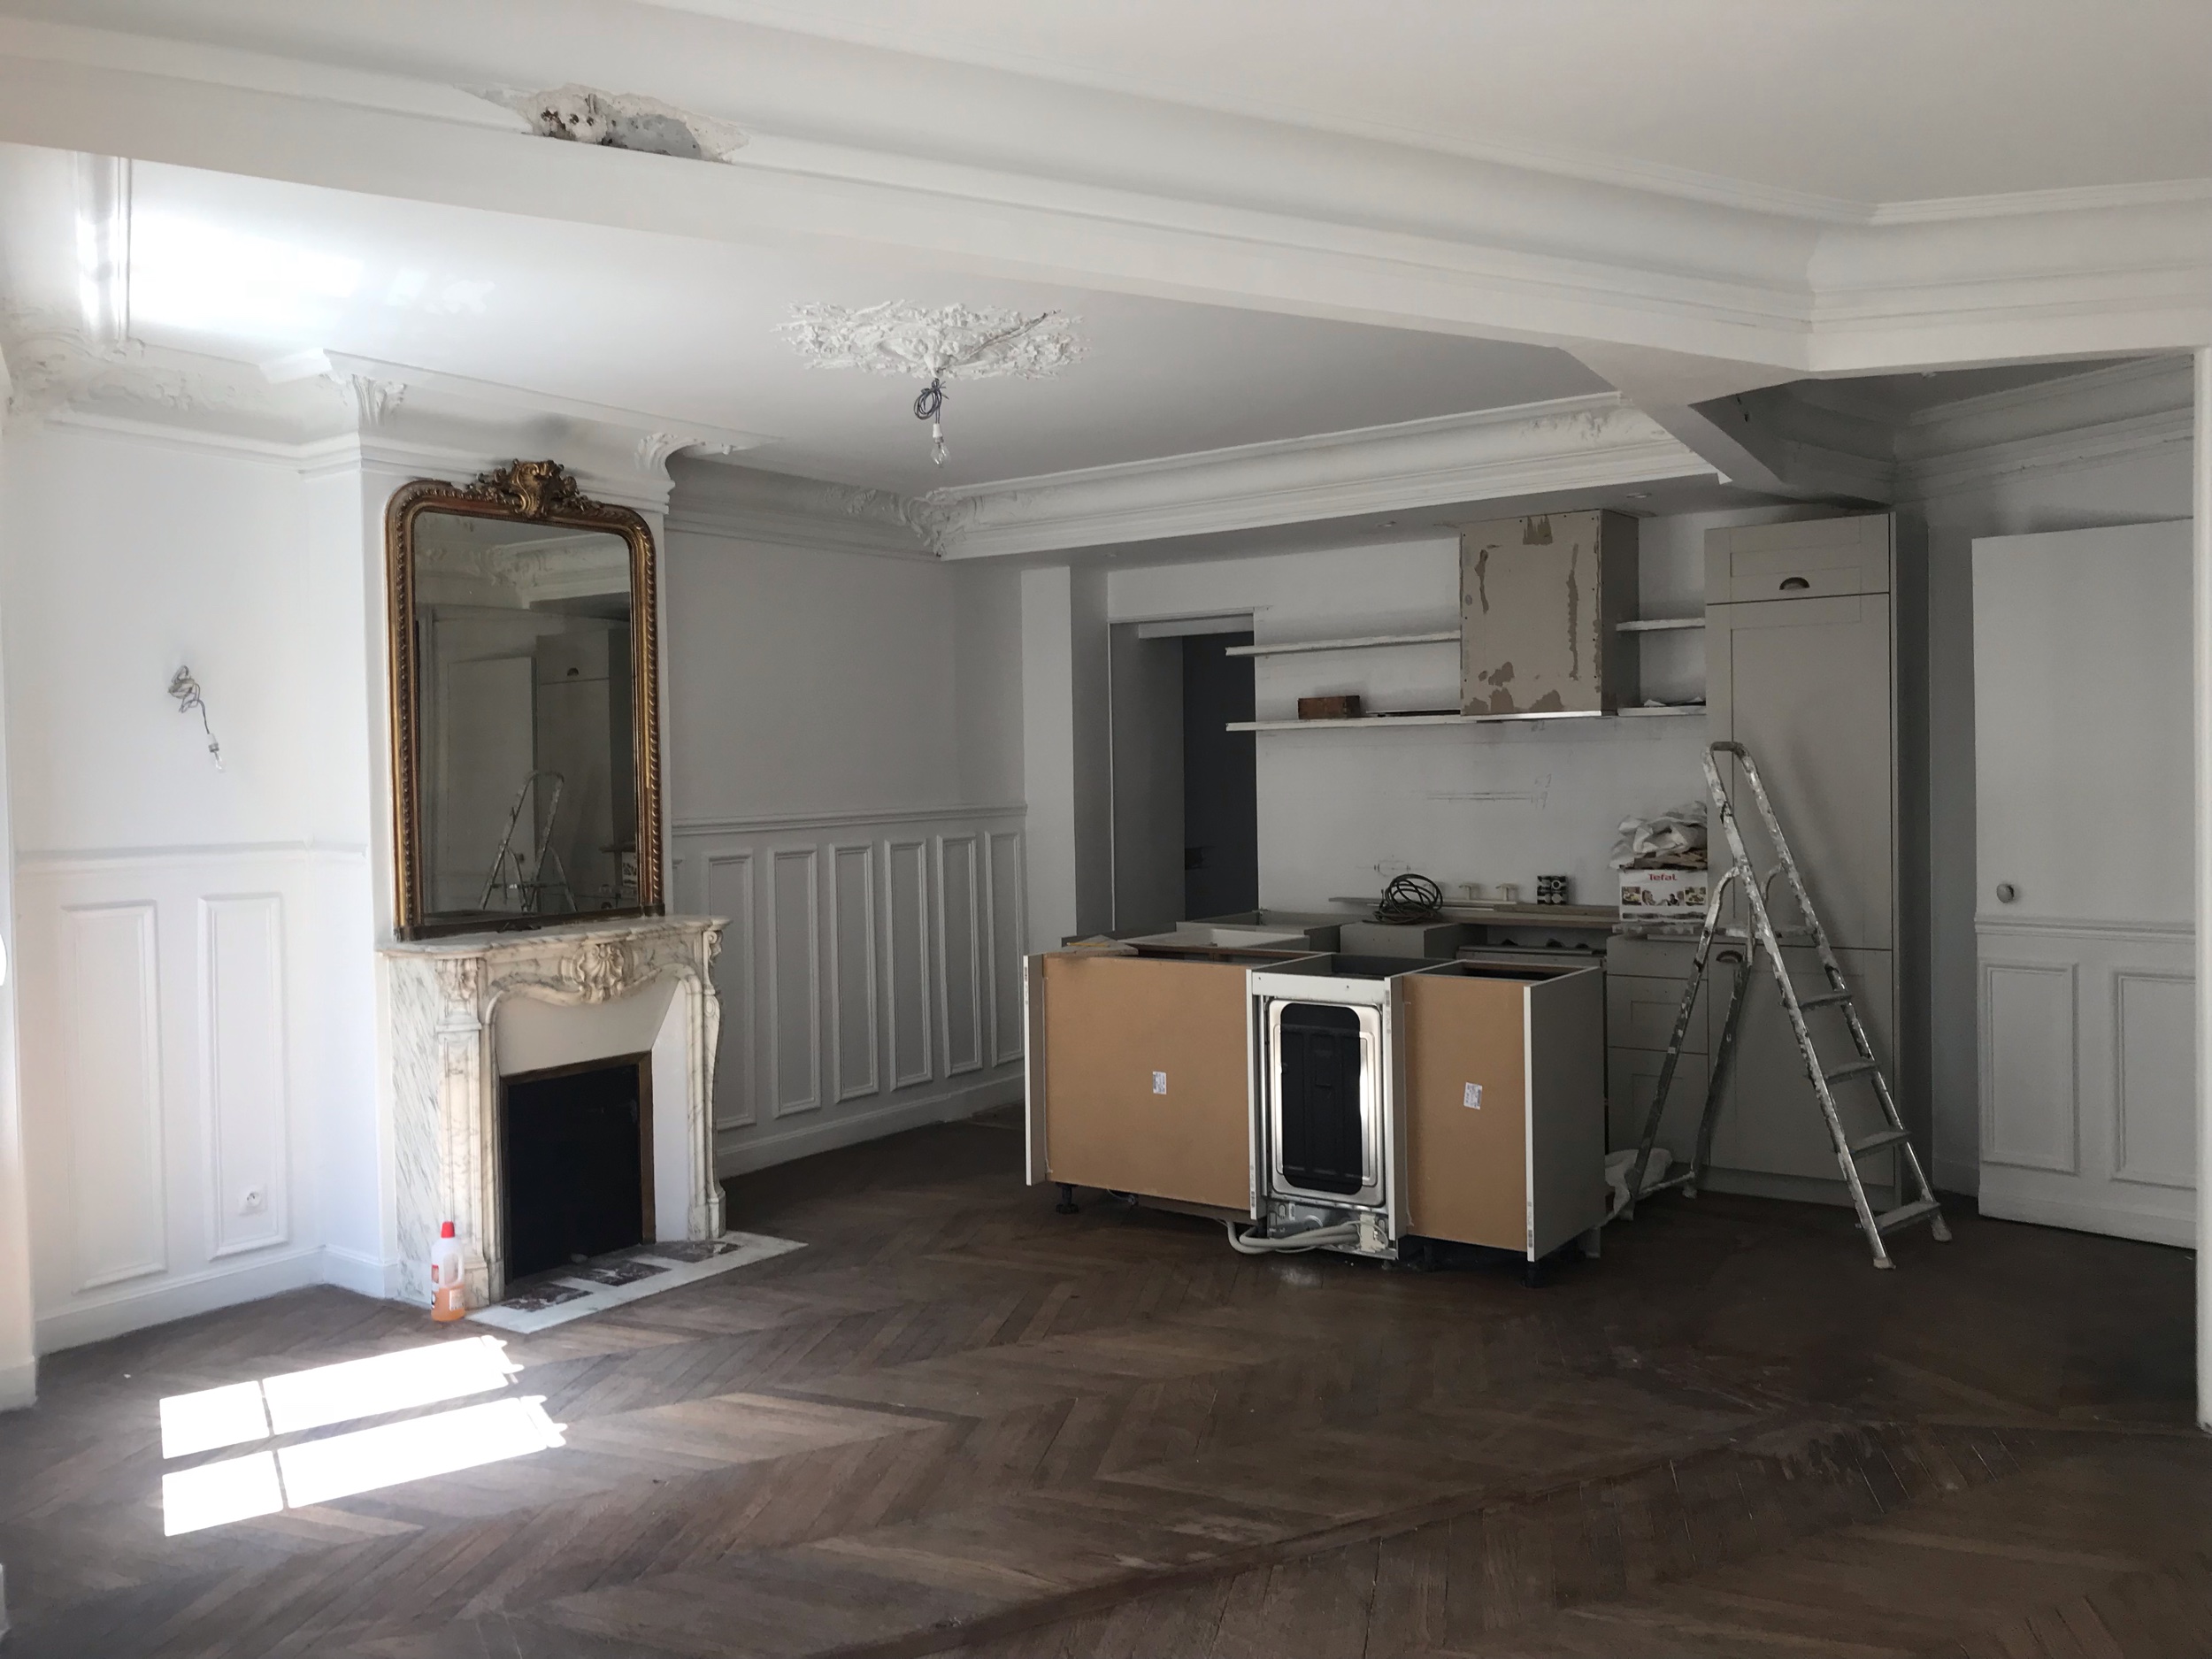 After the walls were removed, looking towards the kitchen in progress